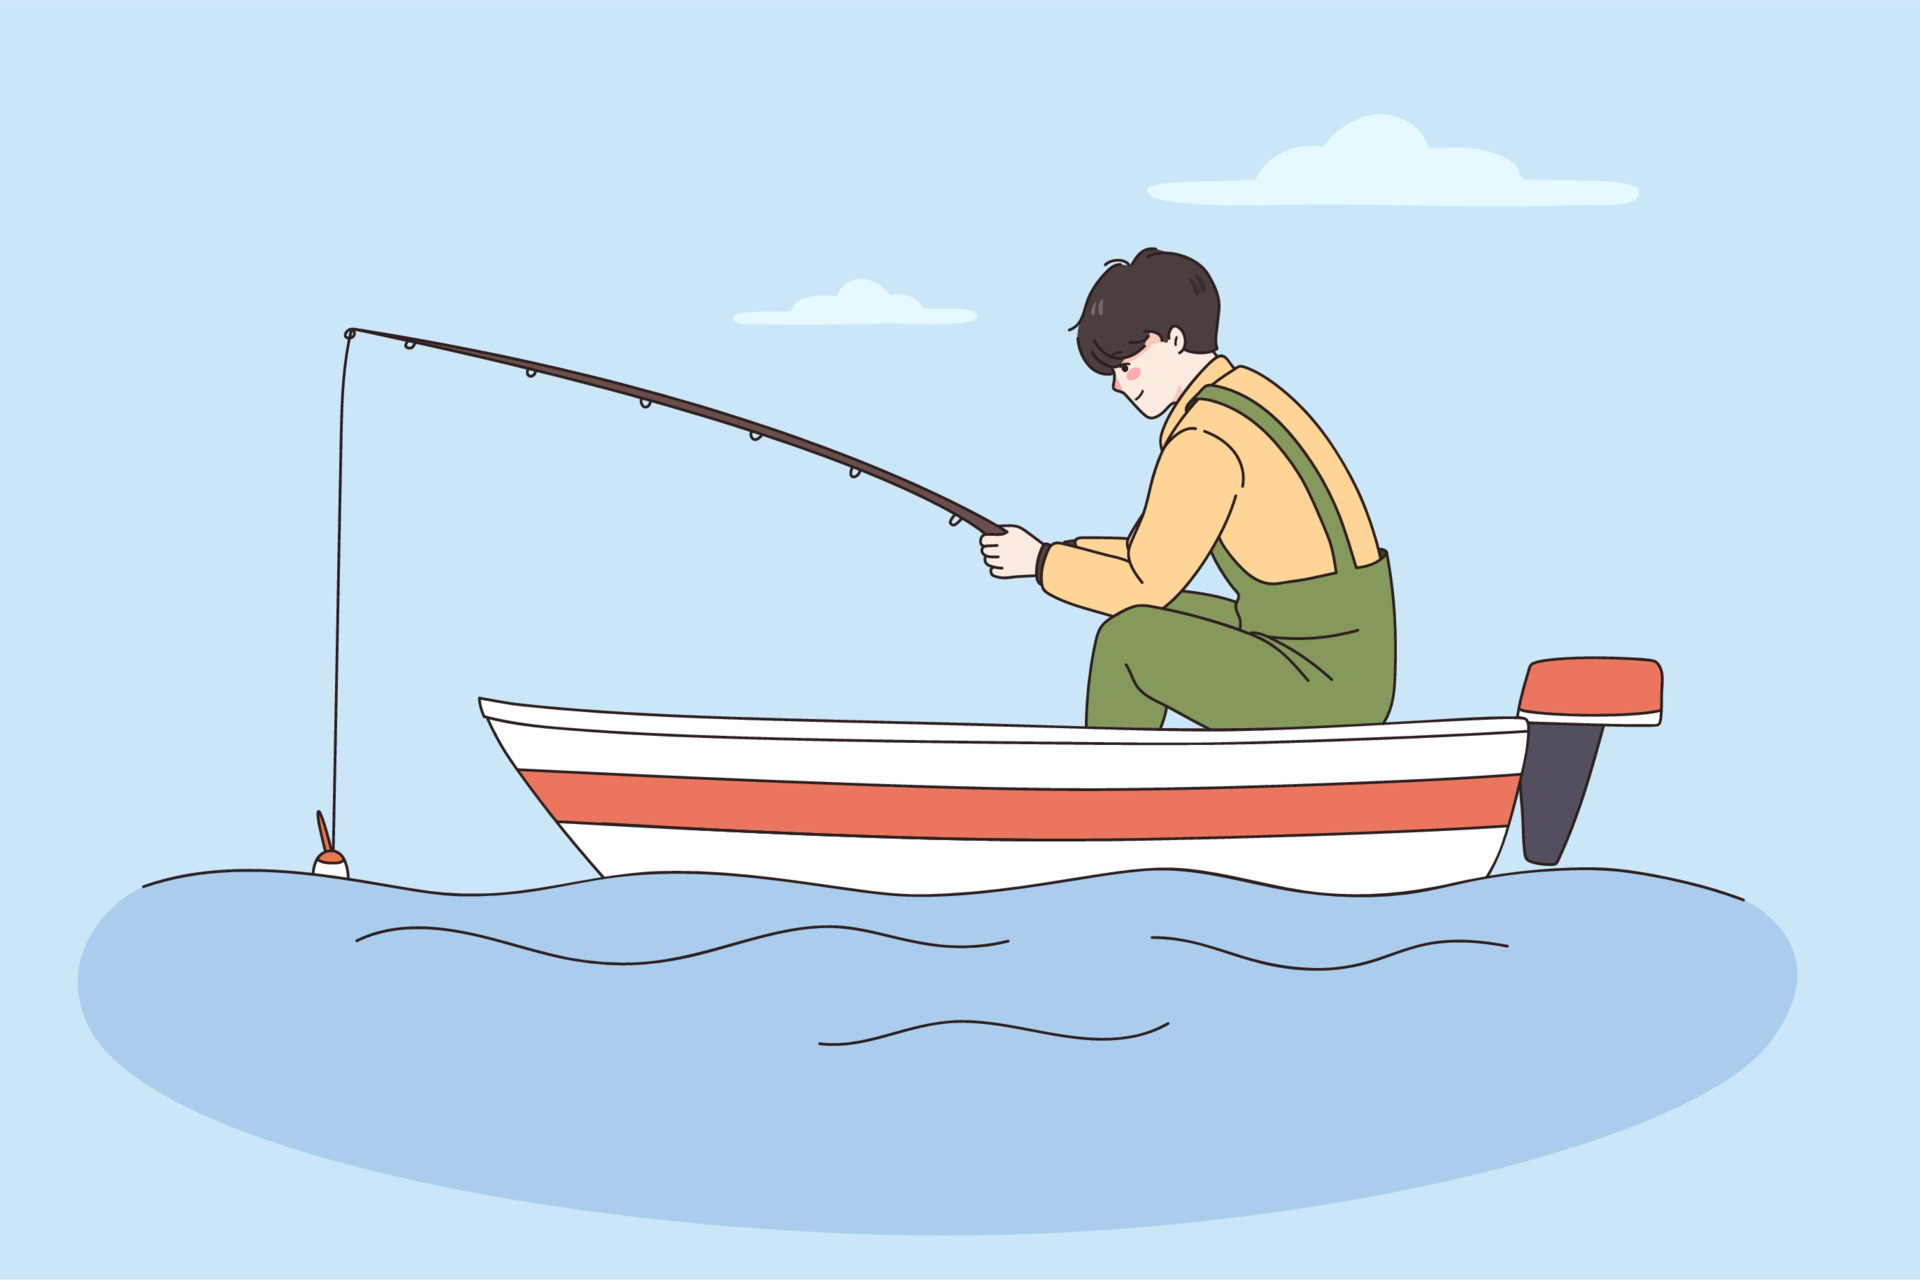 Fishing and summer leisure activities concept. Young man or boy